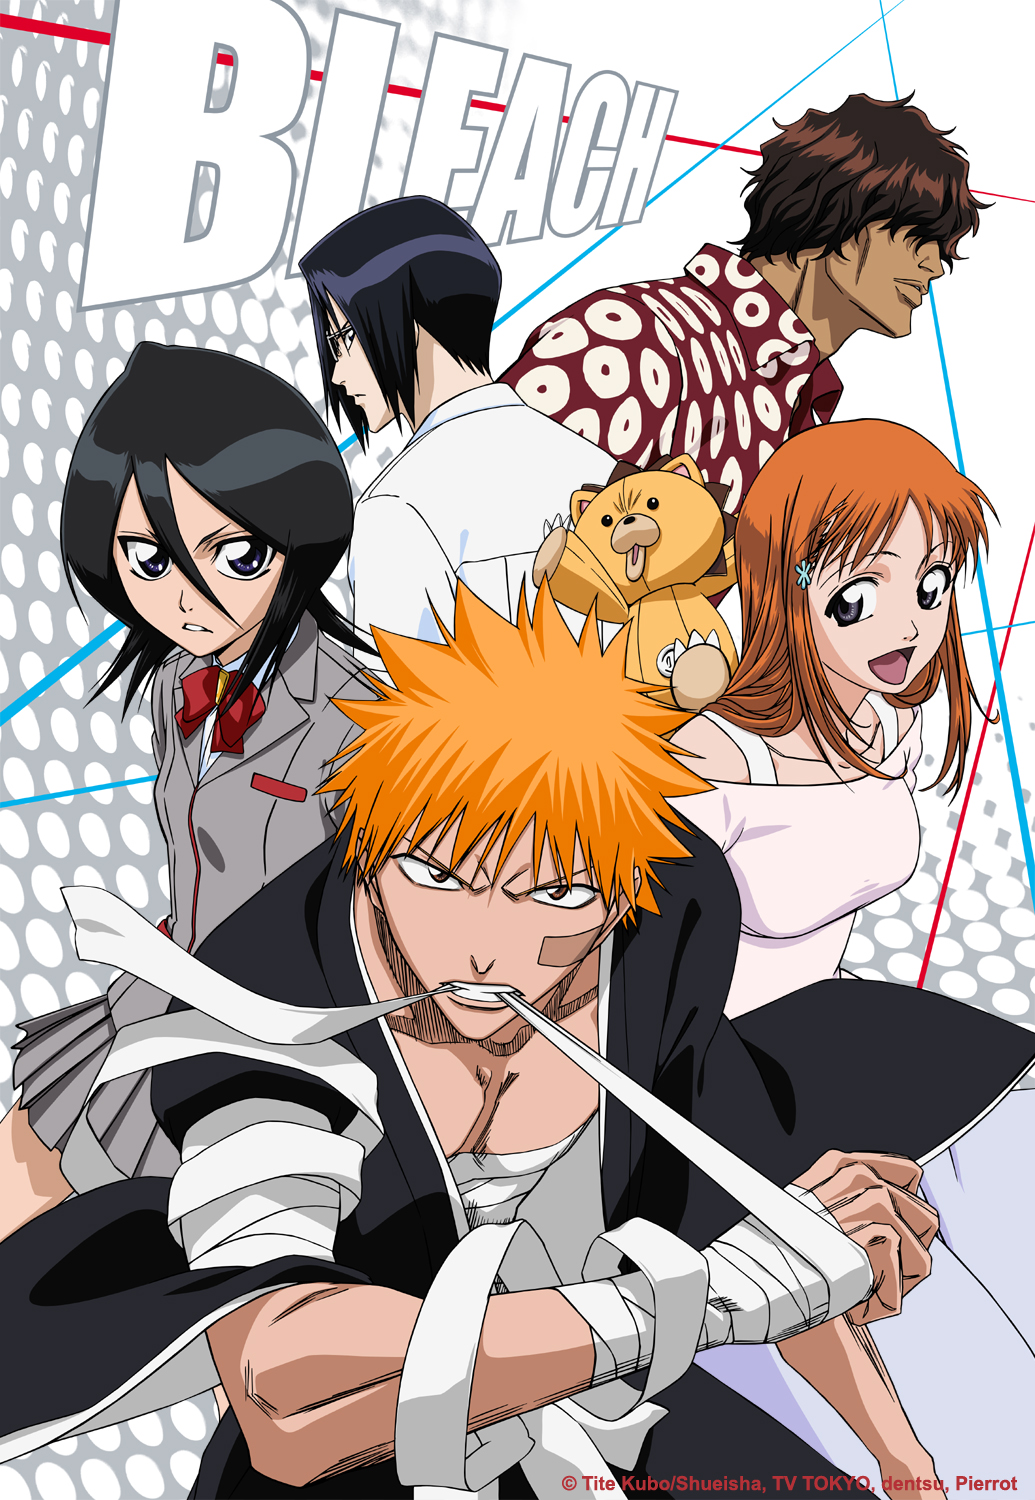 Every Bleach Filler Episode You Can Skip According To YouTube